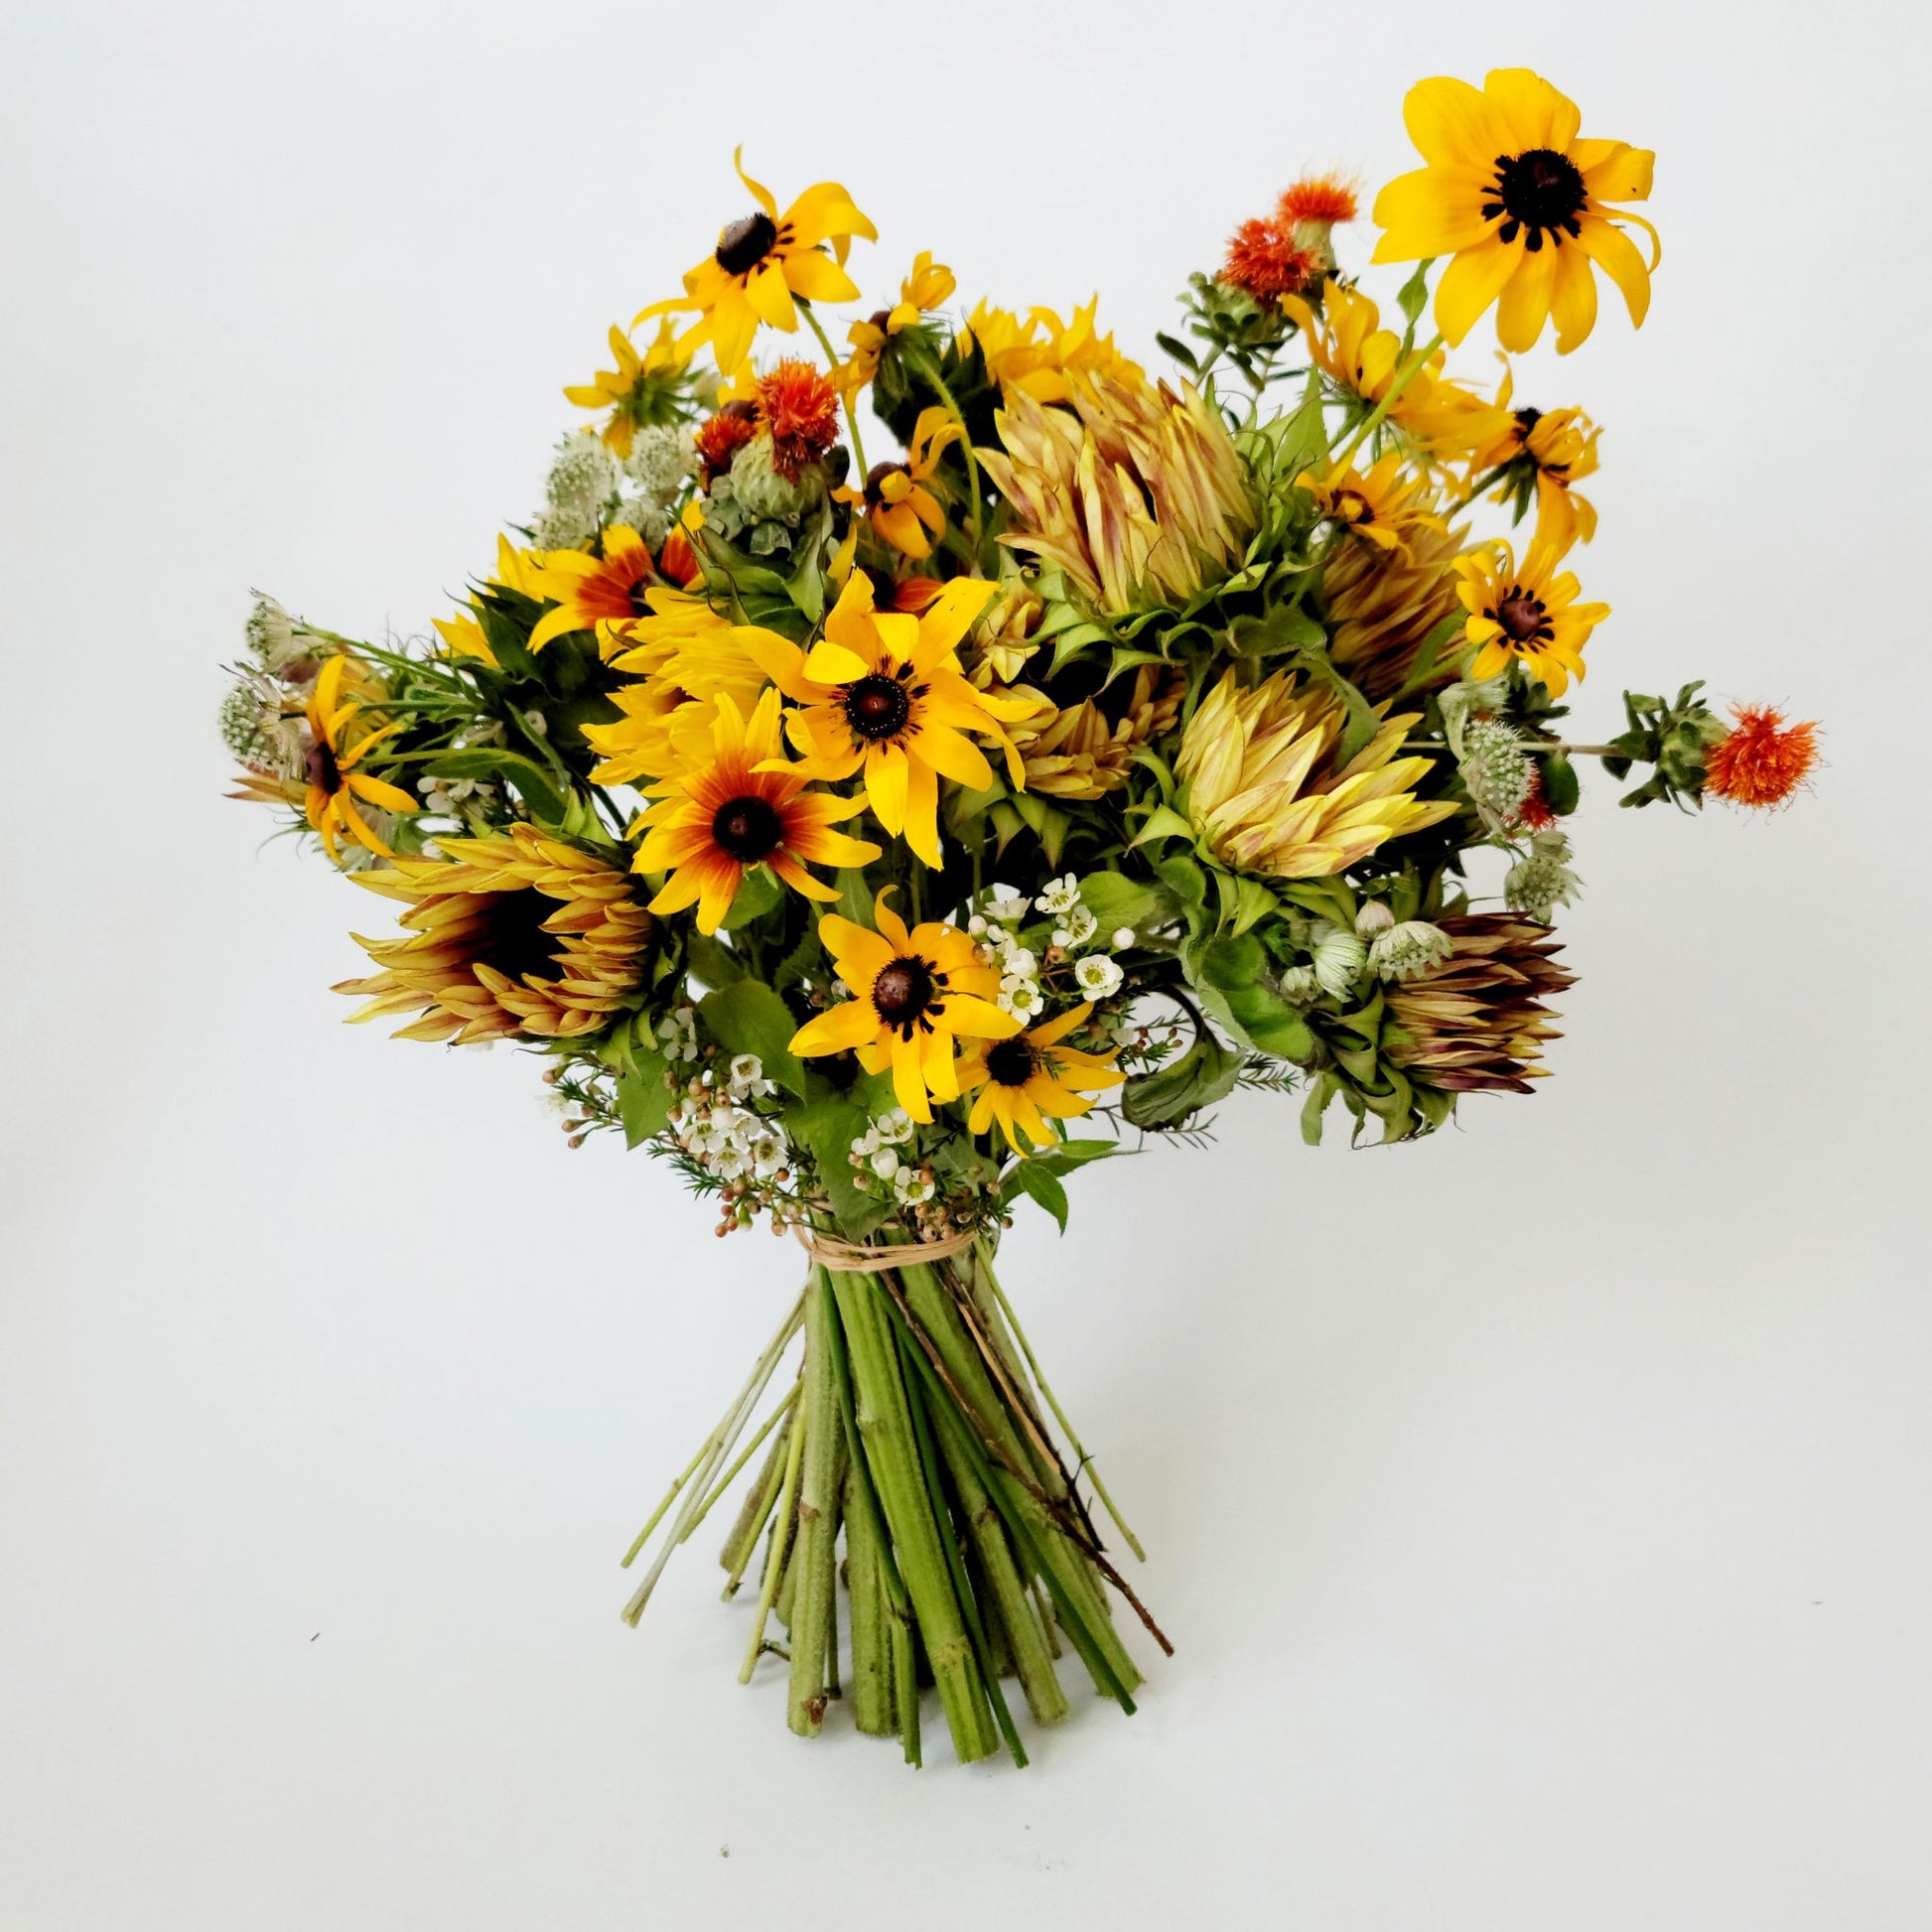 Nashville Florist same day delivery of flowers to the Greater nashville Area